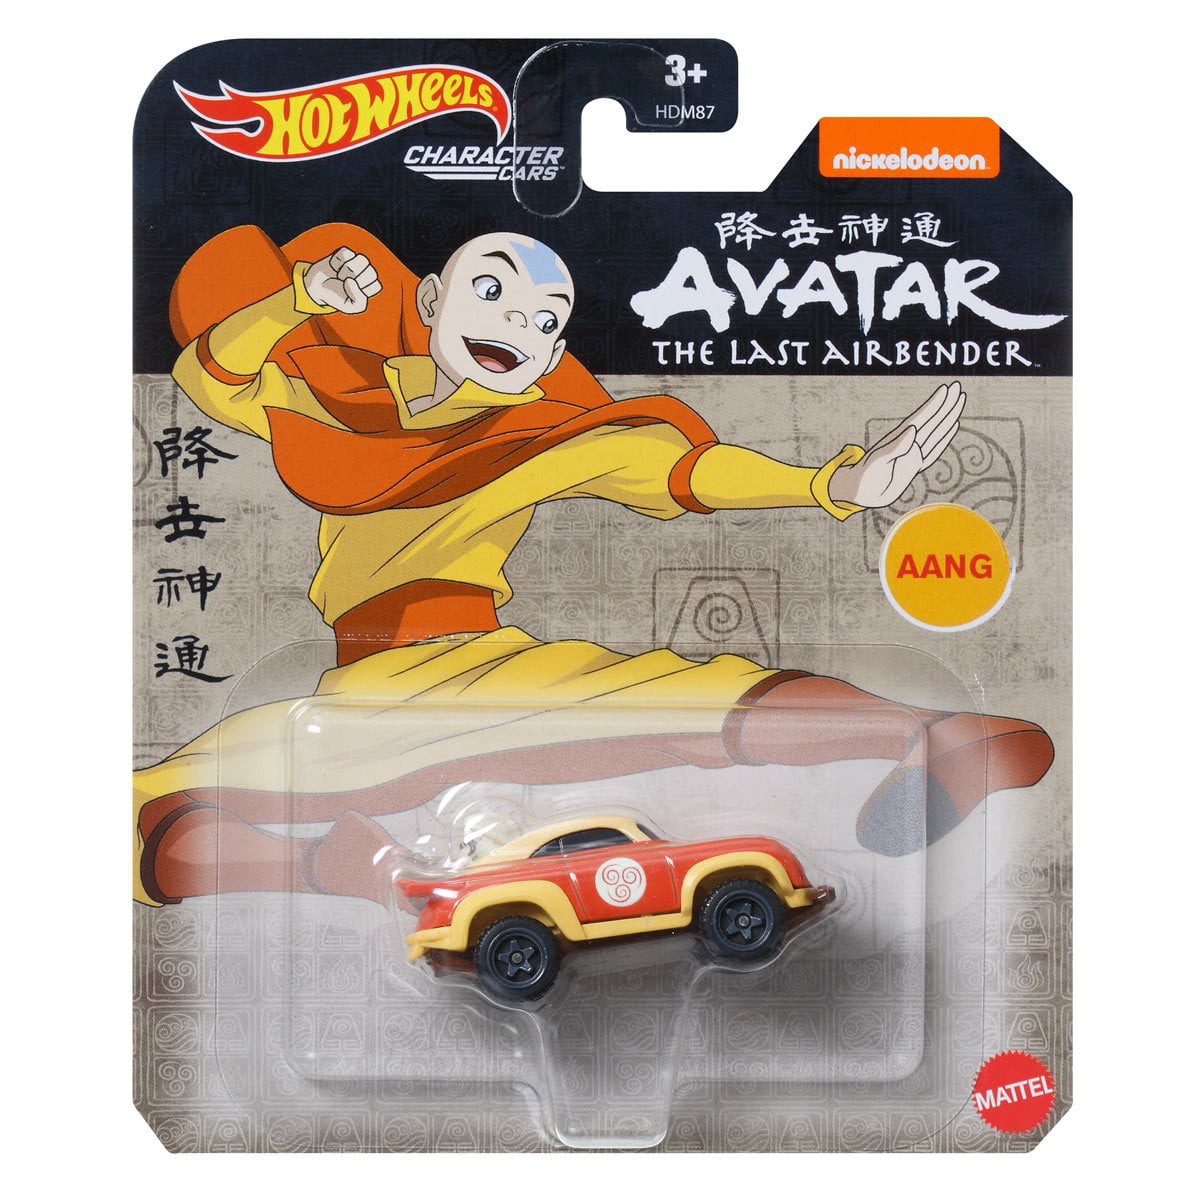 Avatar the Last Airbender Car Accessories  Etsy